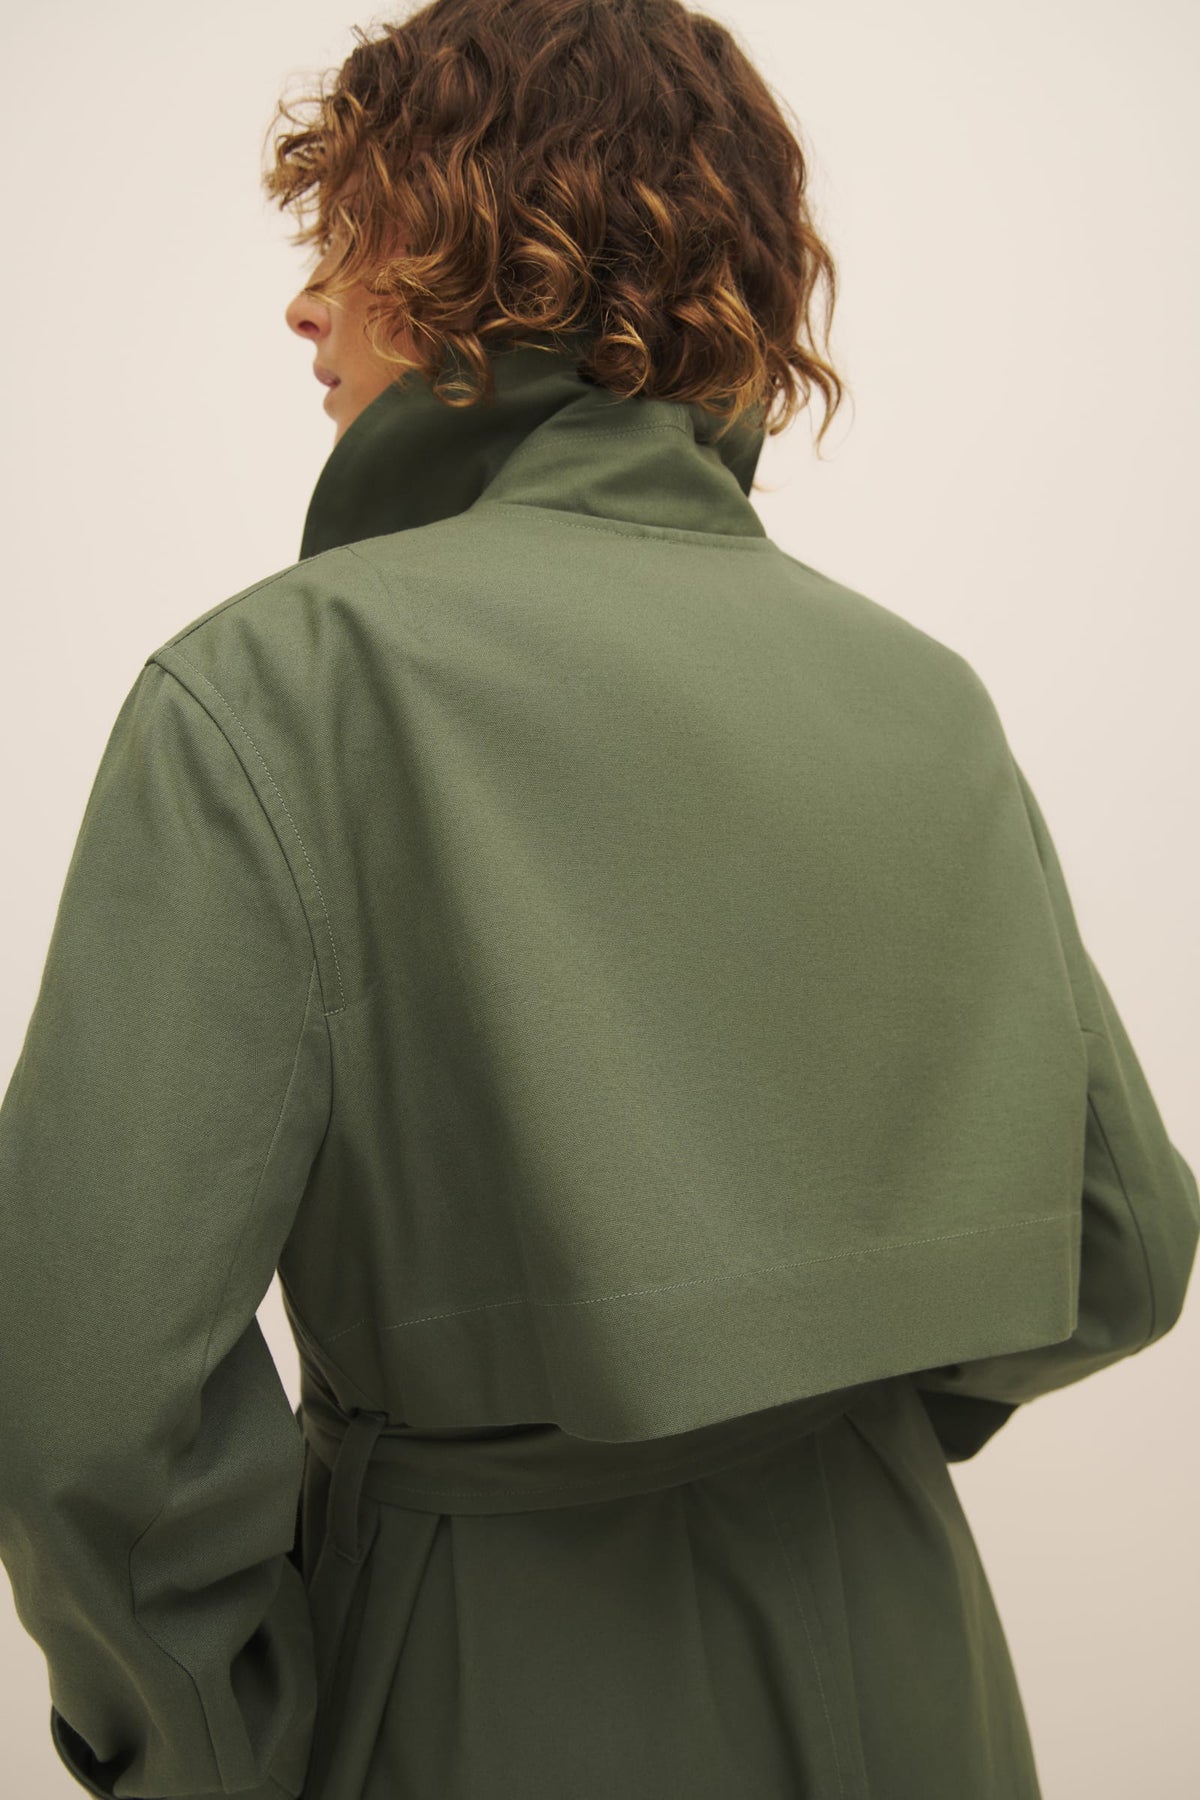 A person seen from behind wearing a Cleo Trench Coat in Sage with the collar turned up, designed for a relaxed fit by Kowtow.